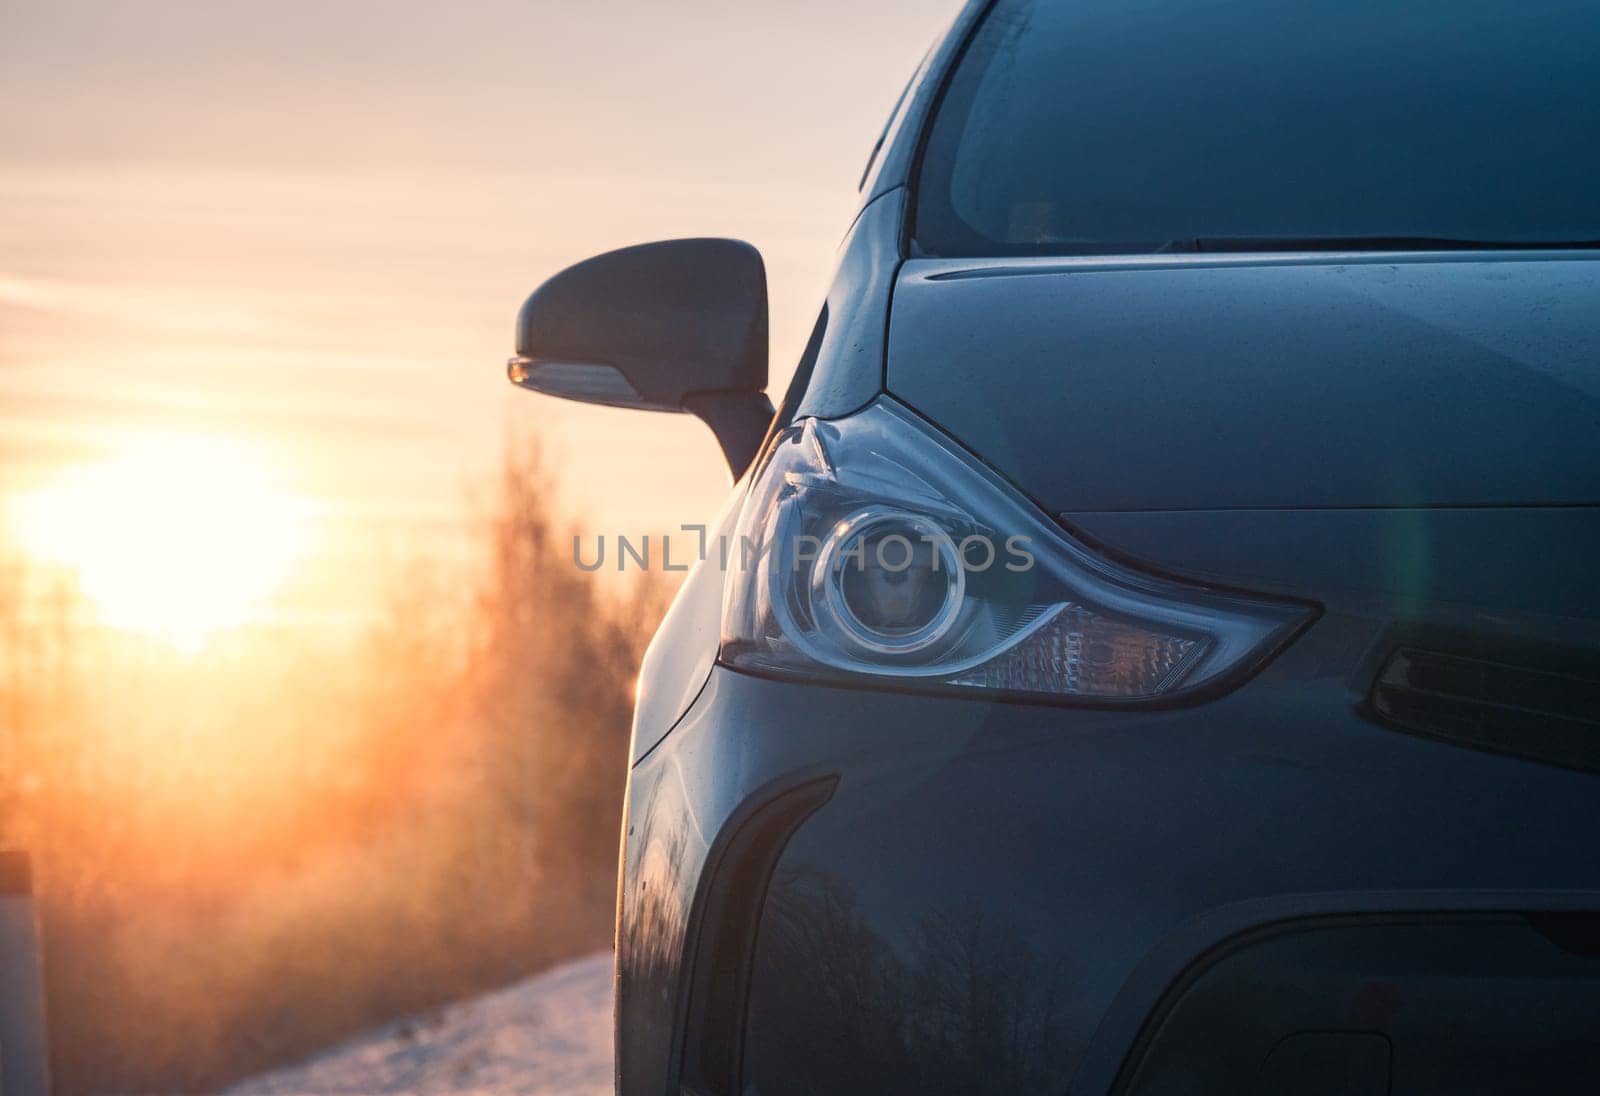 A dark gray car is parked on a snow-covered road as the sun rises in a winter countryside setting, creating a serene and peaceful atmosphere.